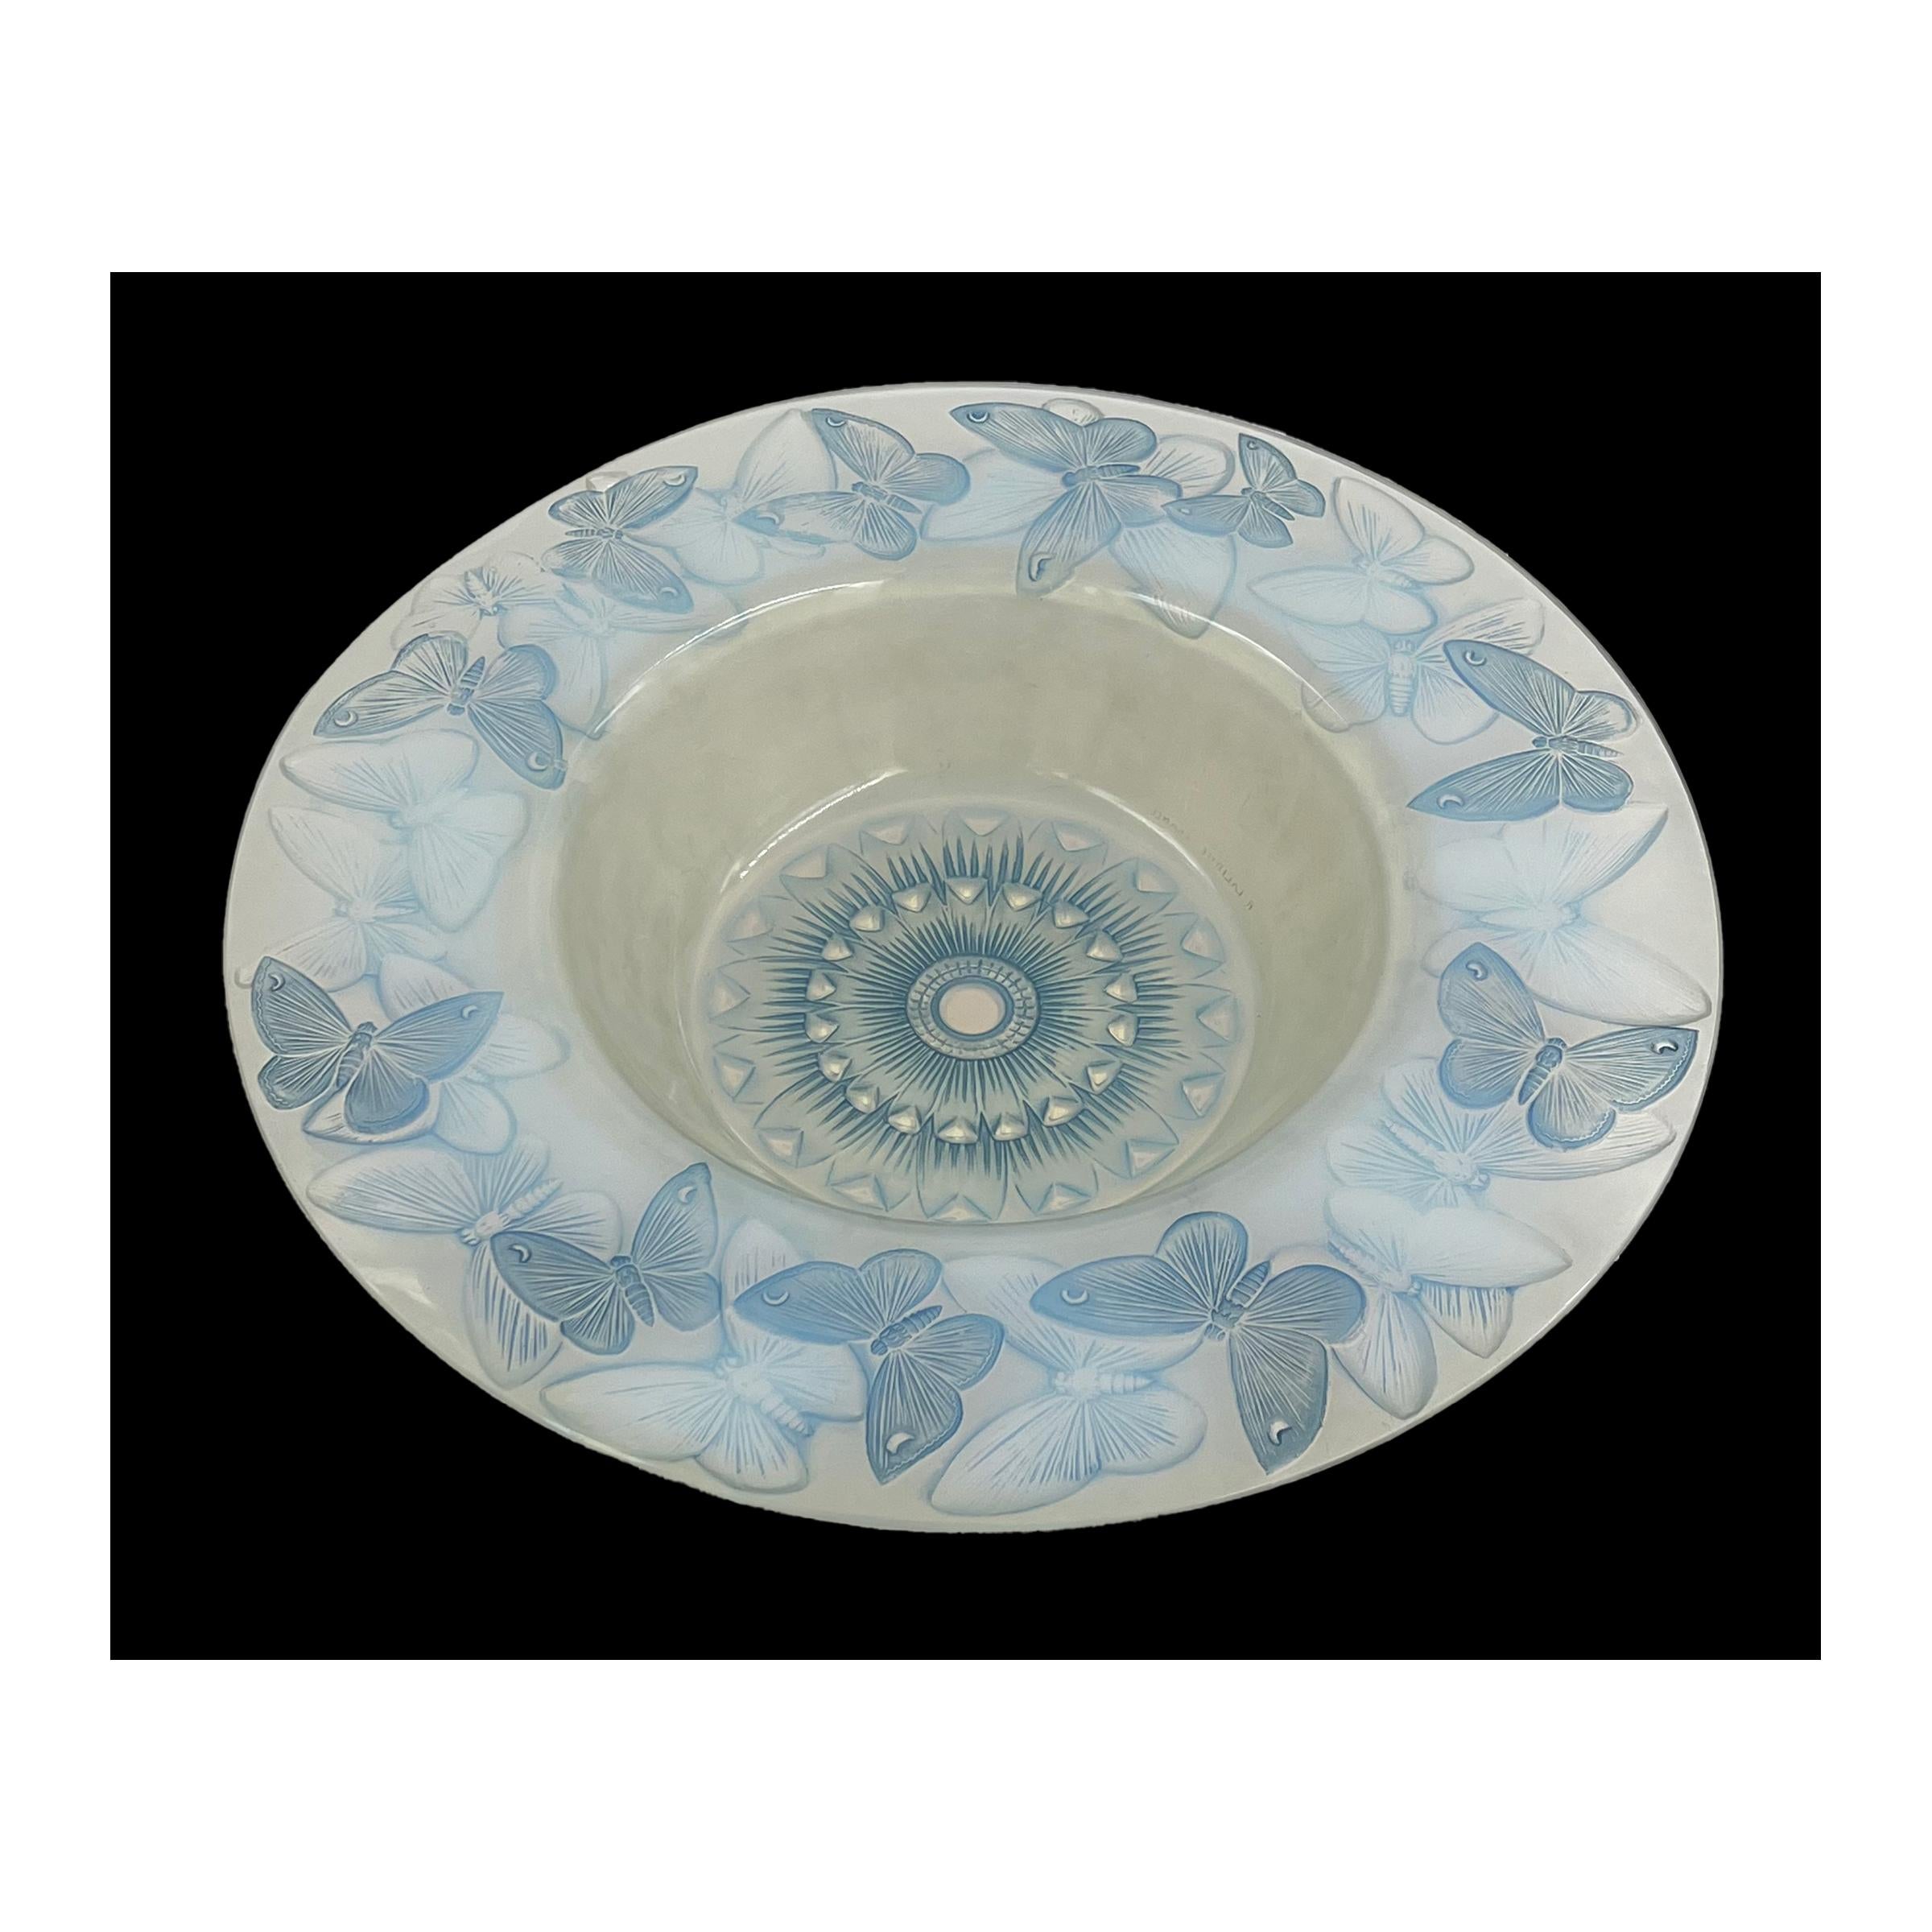 Immerse yourself in the timeless beauty of this 1929-designed Phalenes Bowl by Rene Lalique. Measuring 39 cm wide, the opalescent and blue stained glass showcases a mesmerising interplay of relief and intaglio moulded butterfly, skilfully creating a